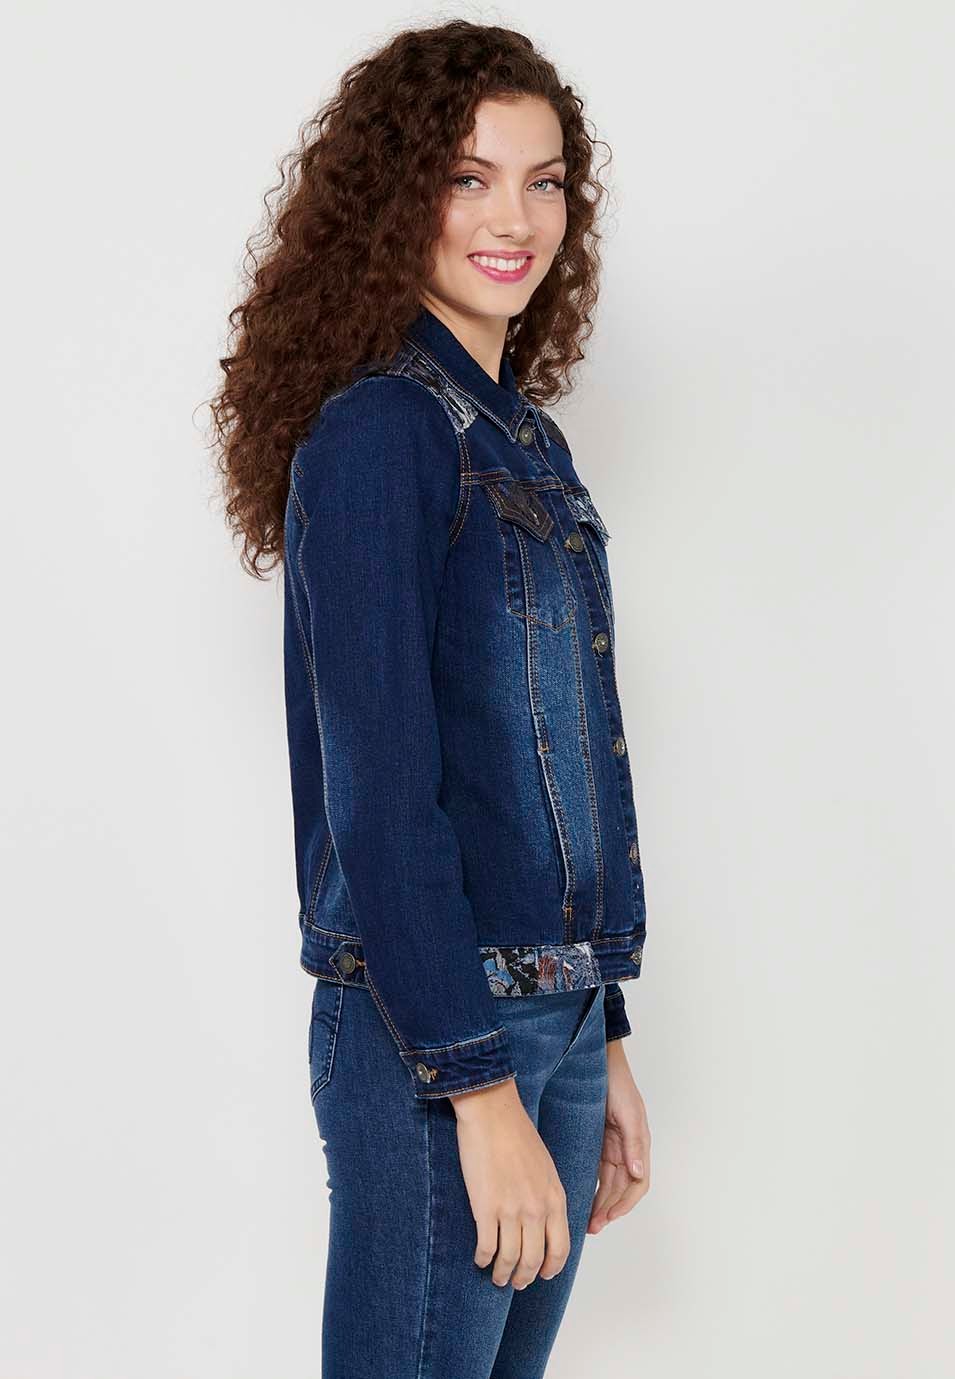 Dark Blue Long Sleeve Denim Jacket with Button Front Closure and Pockets with Embroidery on the Shoulders for Women 6